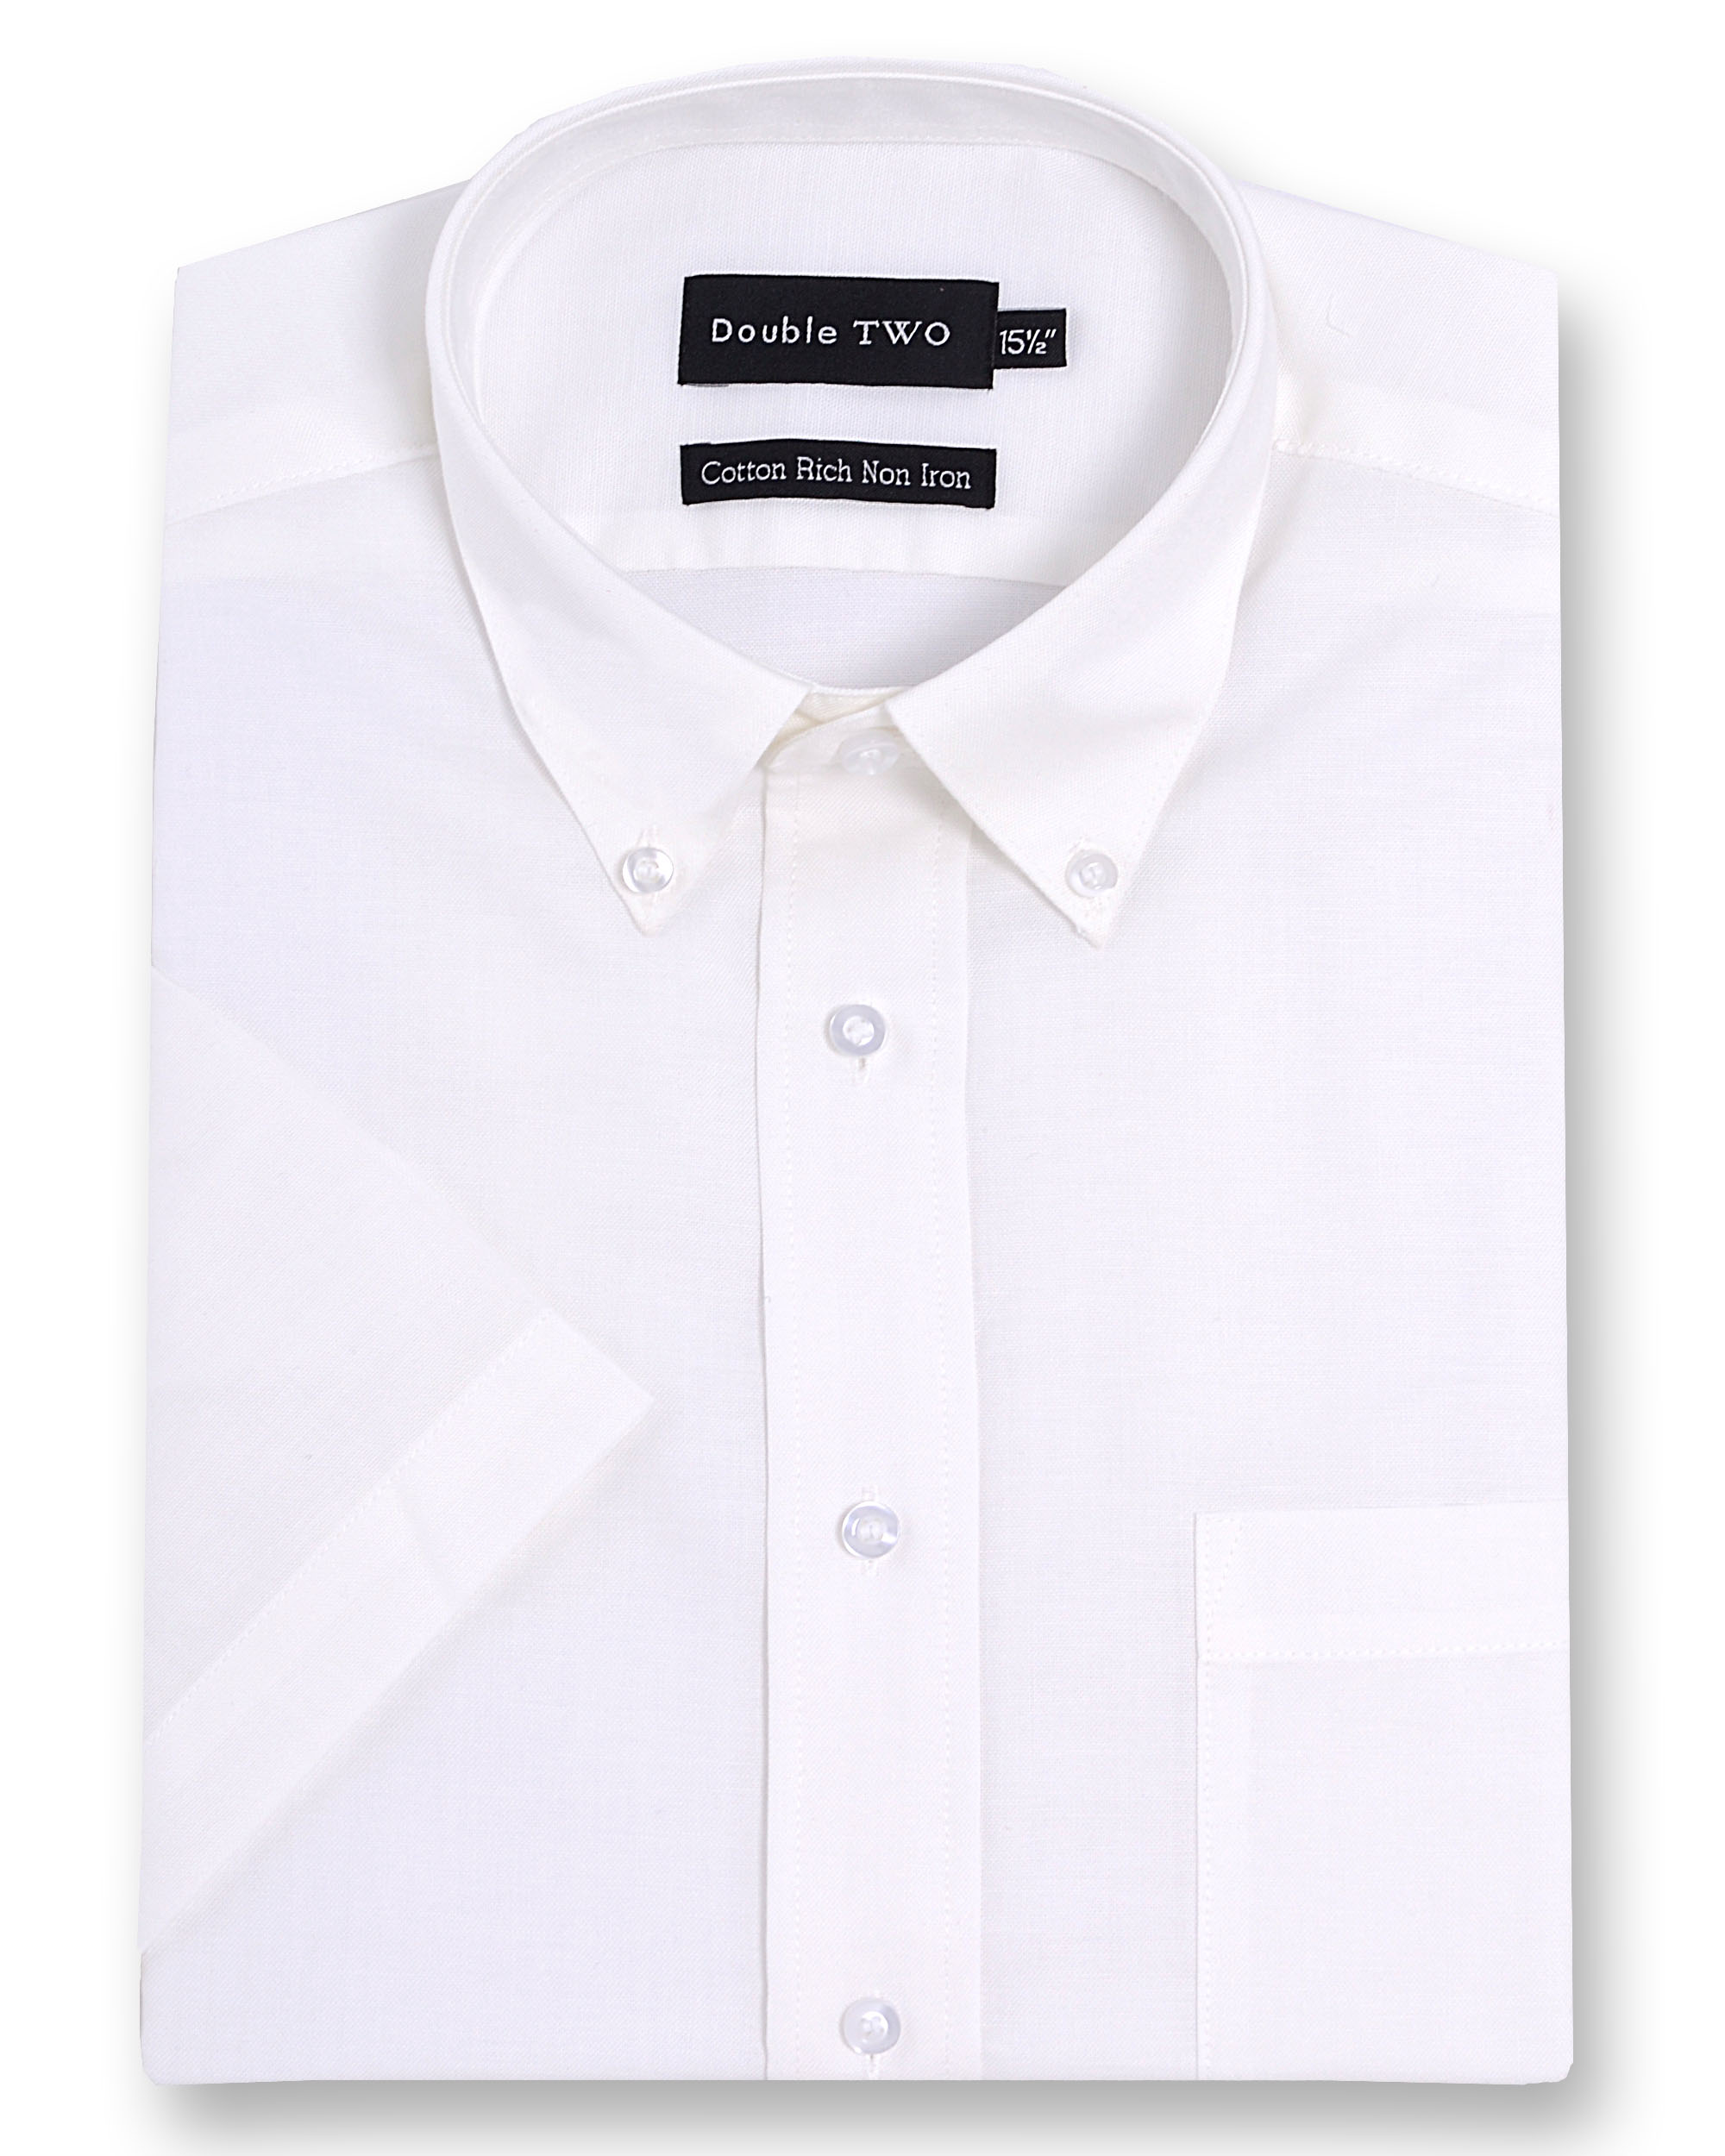 Men’s Double TWO Short Sleeve Oxford Shirt